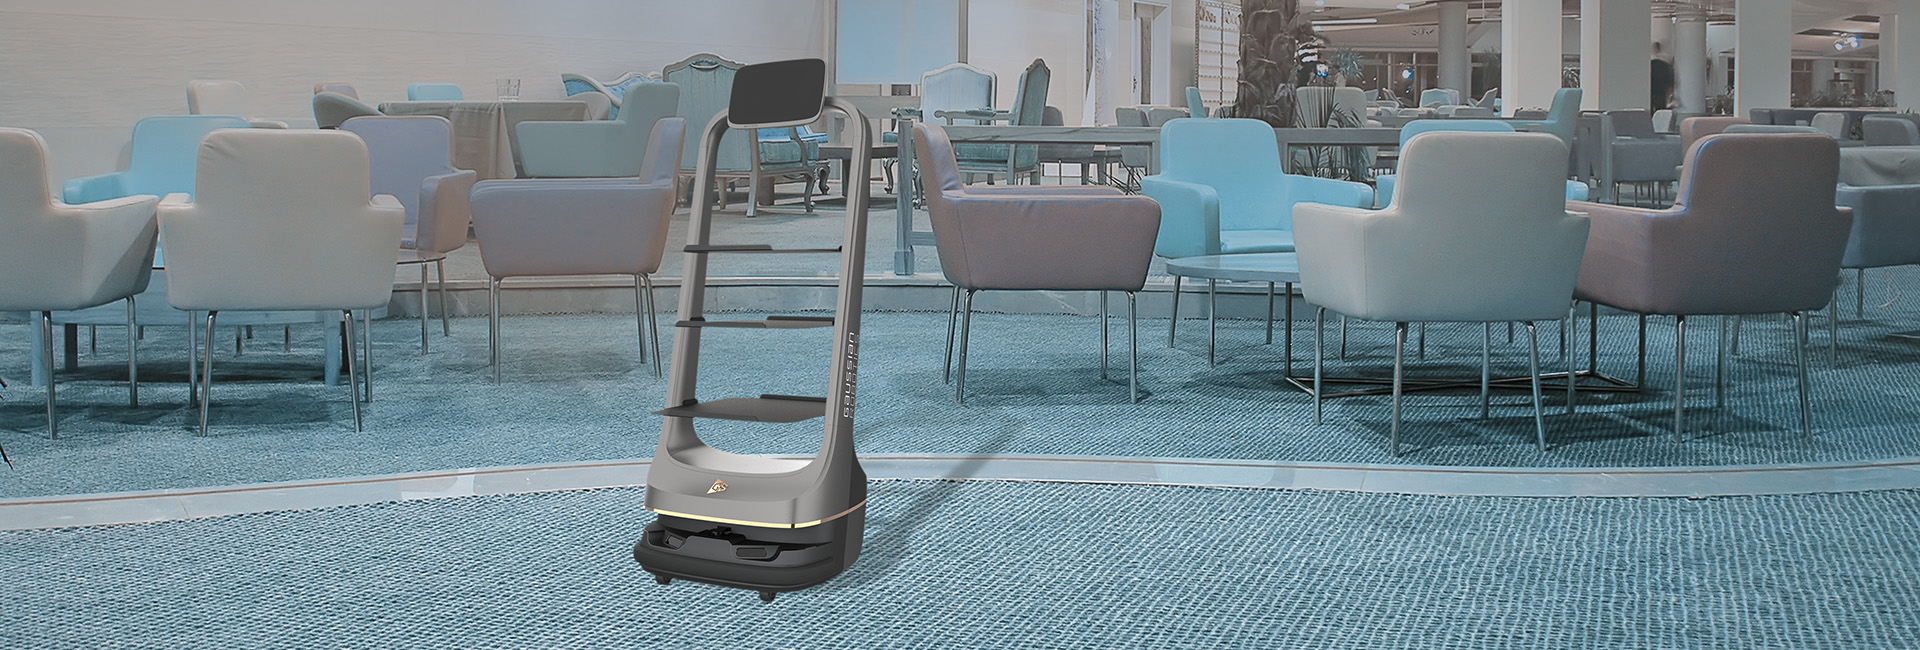 Delivery Robot X1